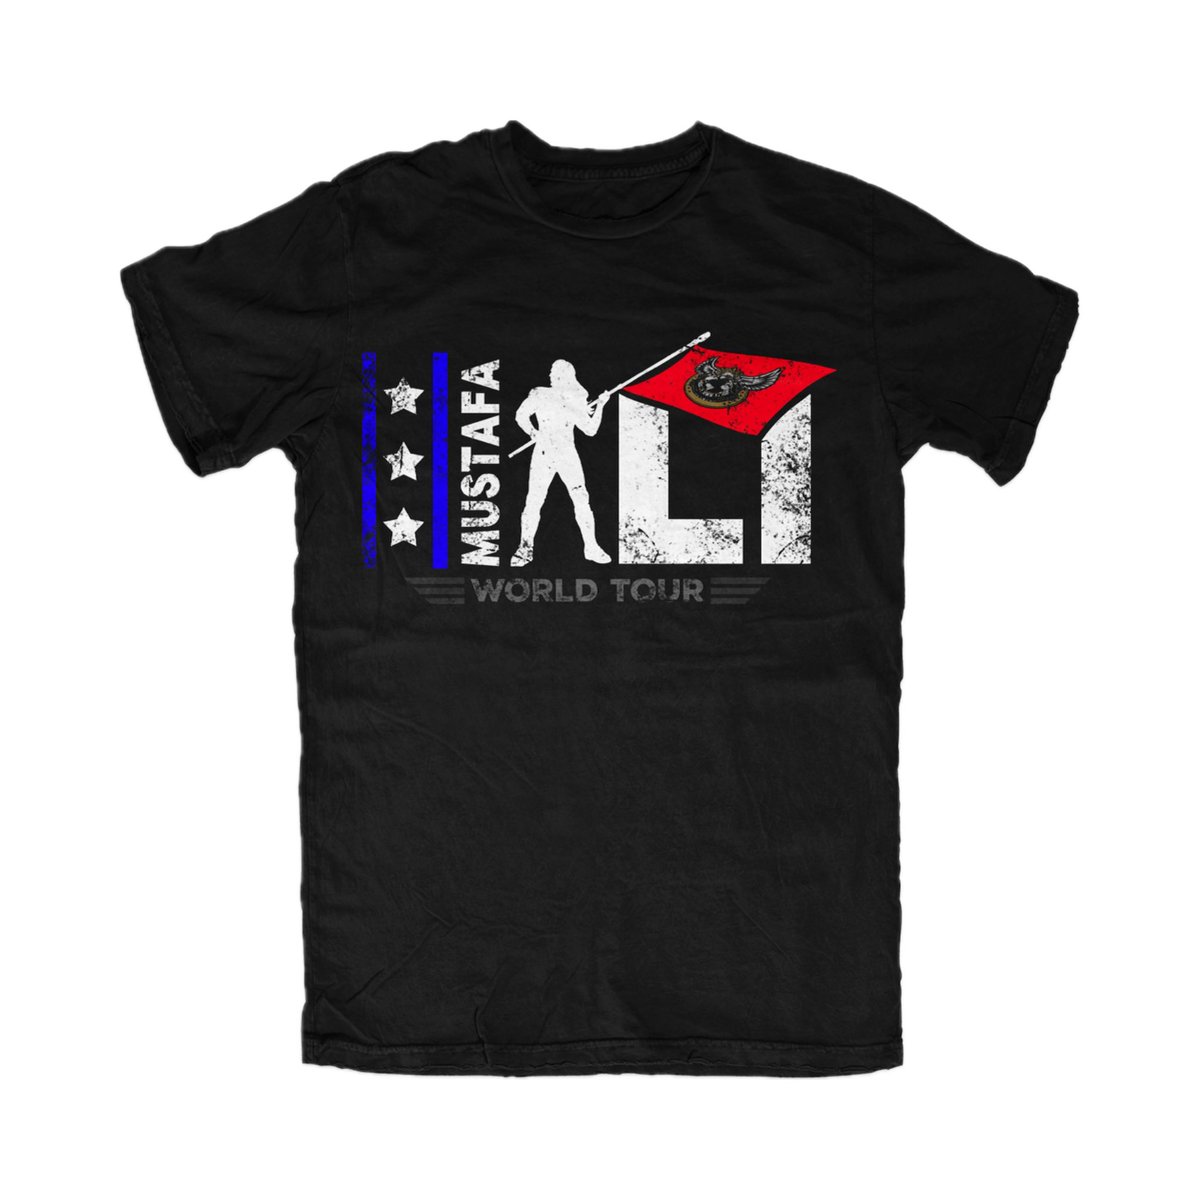 Mustafa Ali World Tour T-Shirt now available on @PWTees. Join the movement. Support the cause. Designed by Doug Hills. Order here: prowrestlingtees.com/wrestler-t-shi…